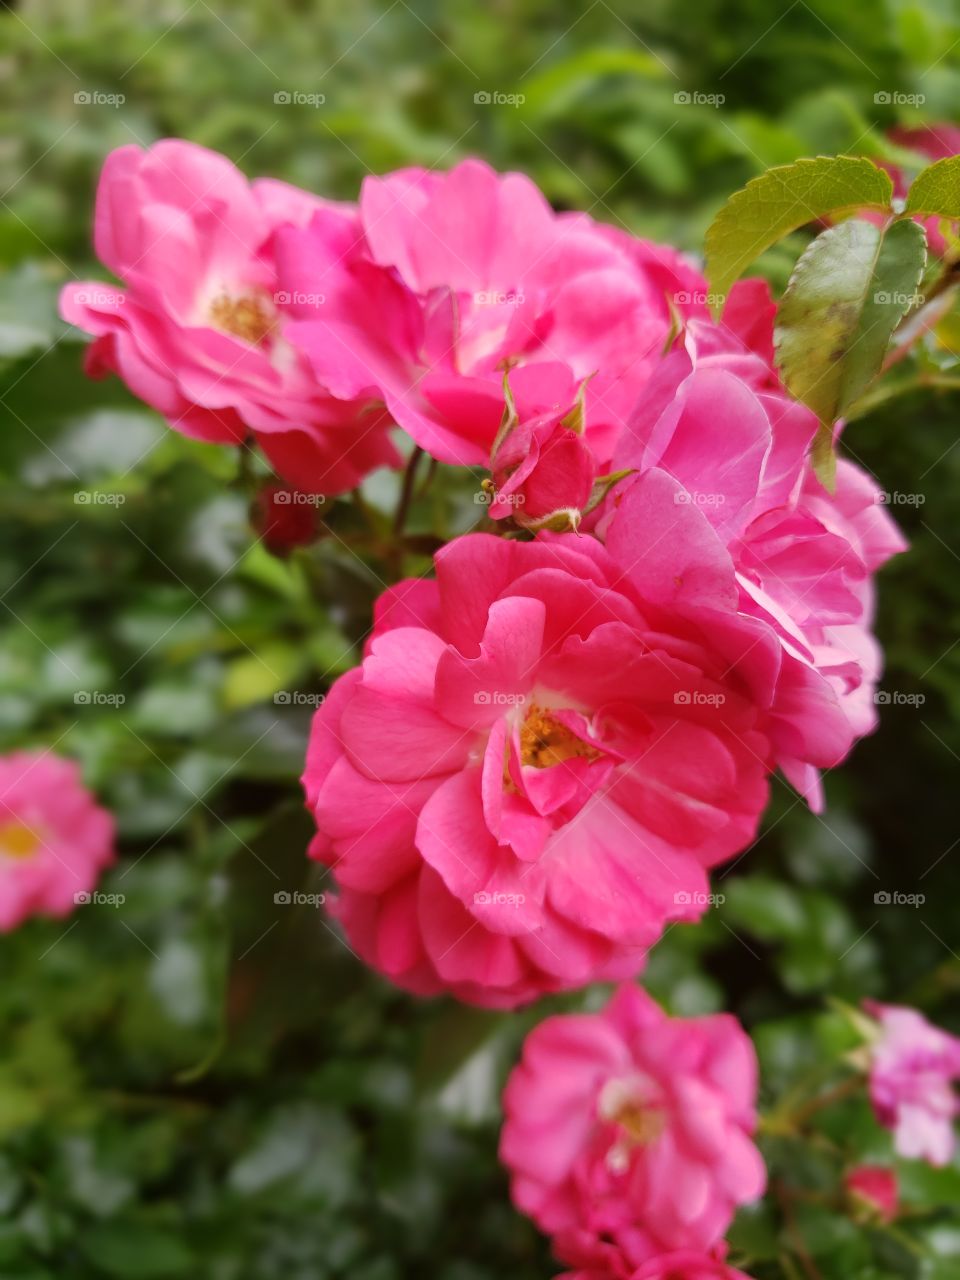 Pink roses close-up, cluster of flowers